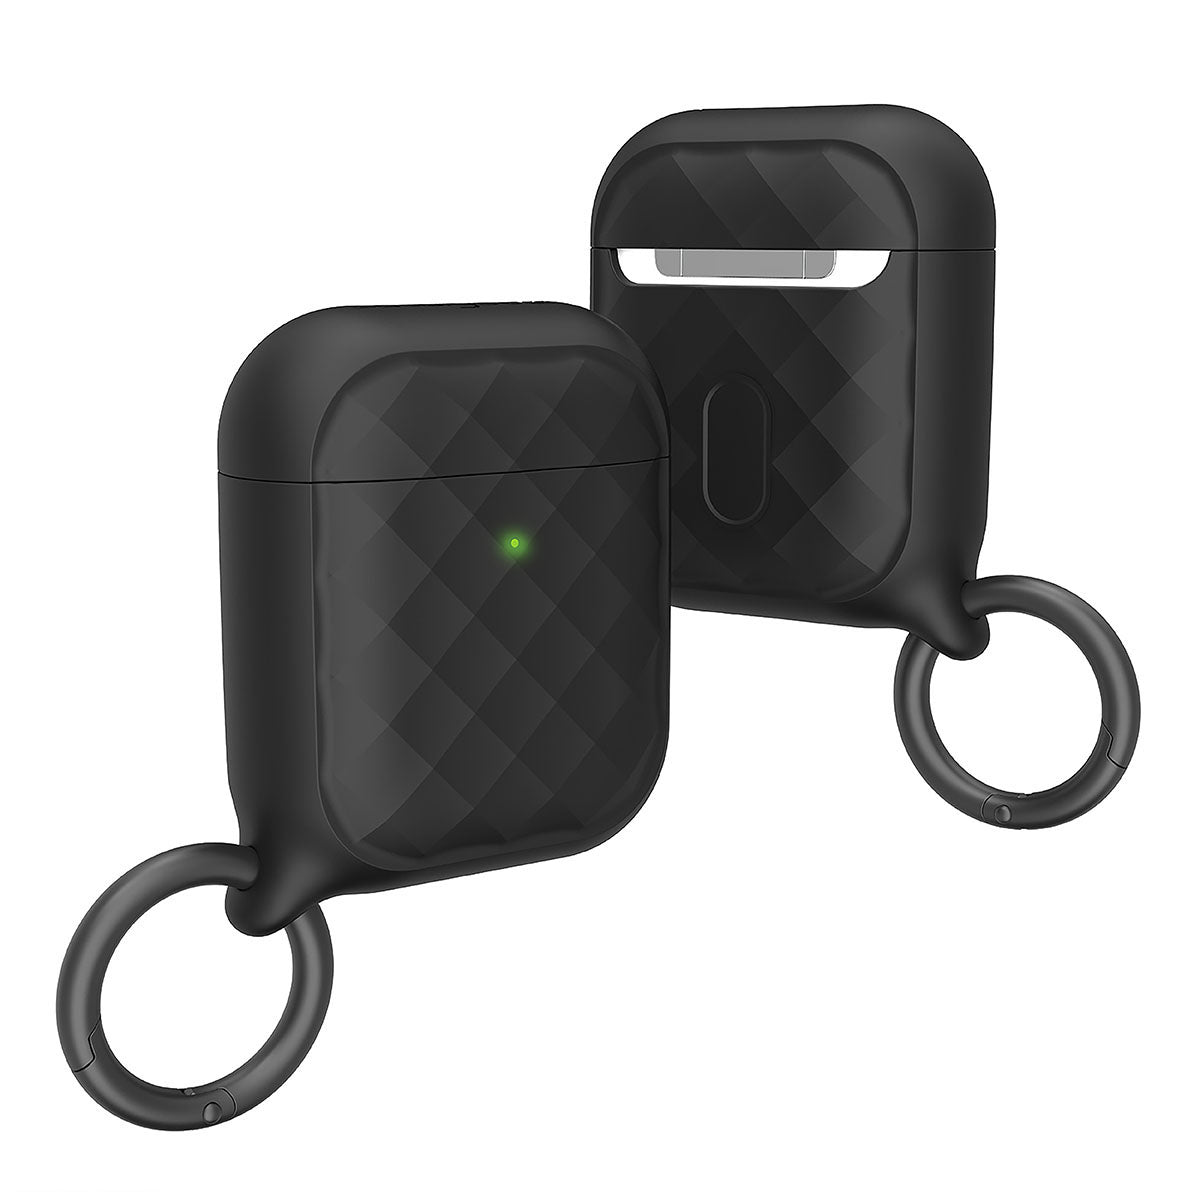 Catalyst airpods gen2/1 case eing clip carabiner showing the front and back of the case with ring clip carabiner attached